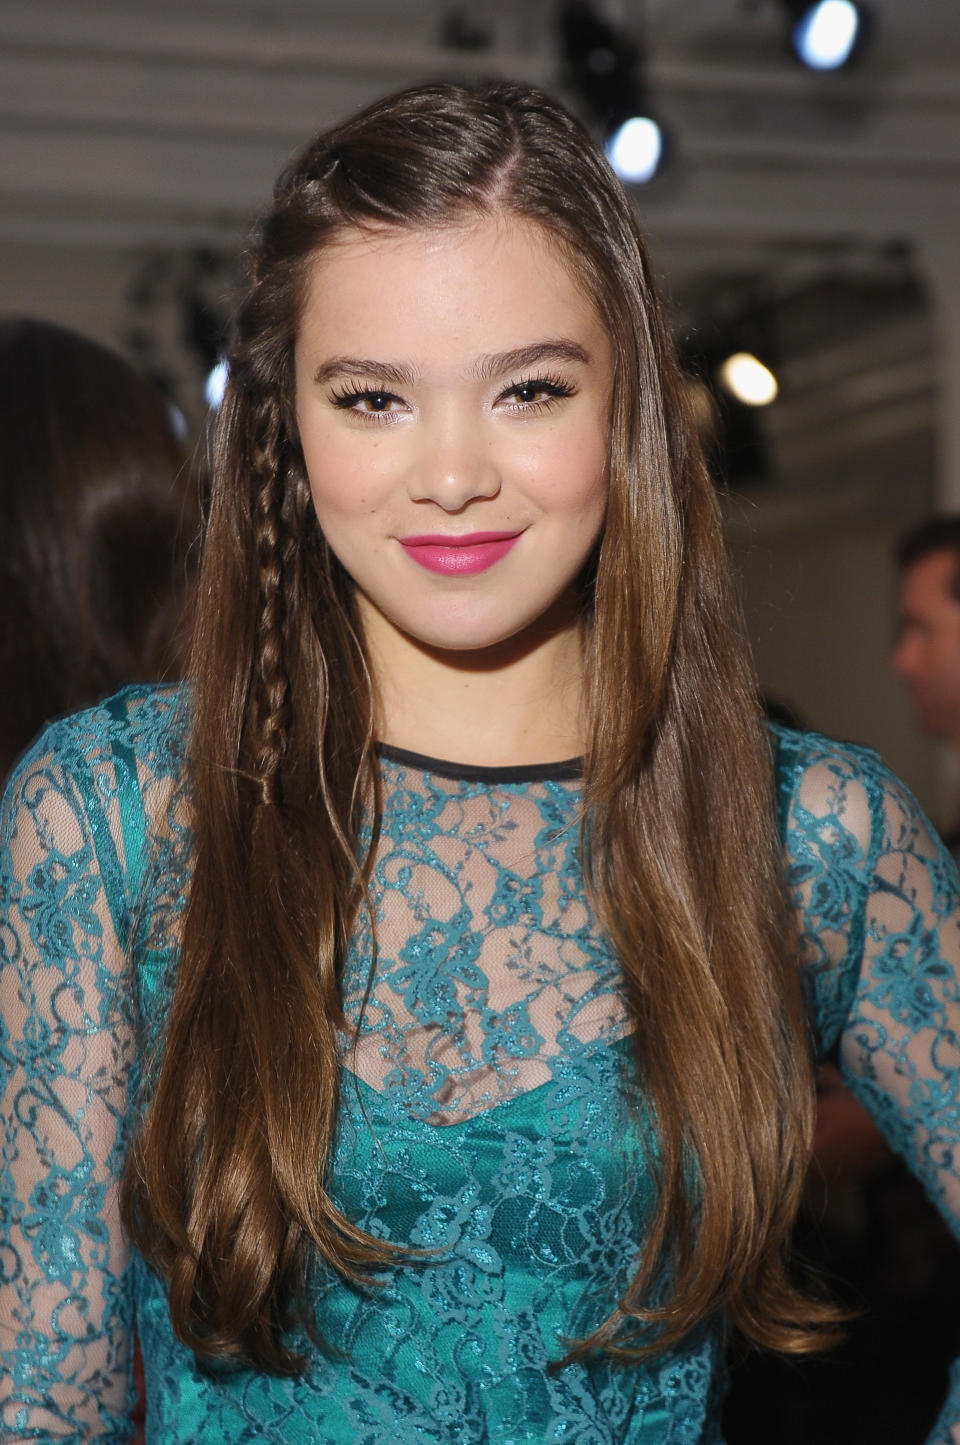 NEW YORK, NY - SEPTEMBER 07: Actress Hailee Steinfeld attends the Peter Som spring 2013 fashion show during Mercedes-Benz Fashion Week at Milk Studios on September 7, 2012 in New York City. (Photo by Michael Loccisano/Getty Images)